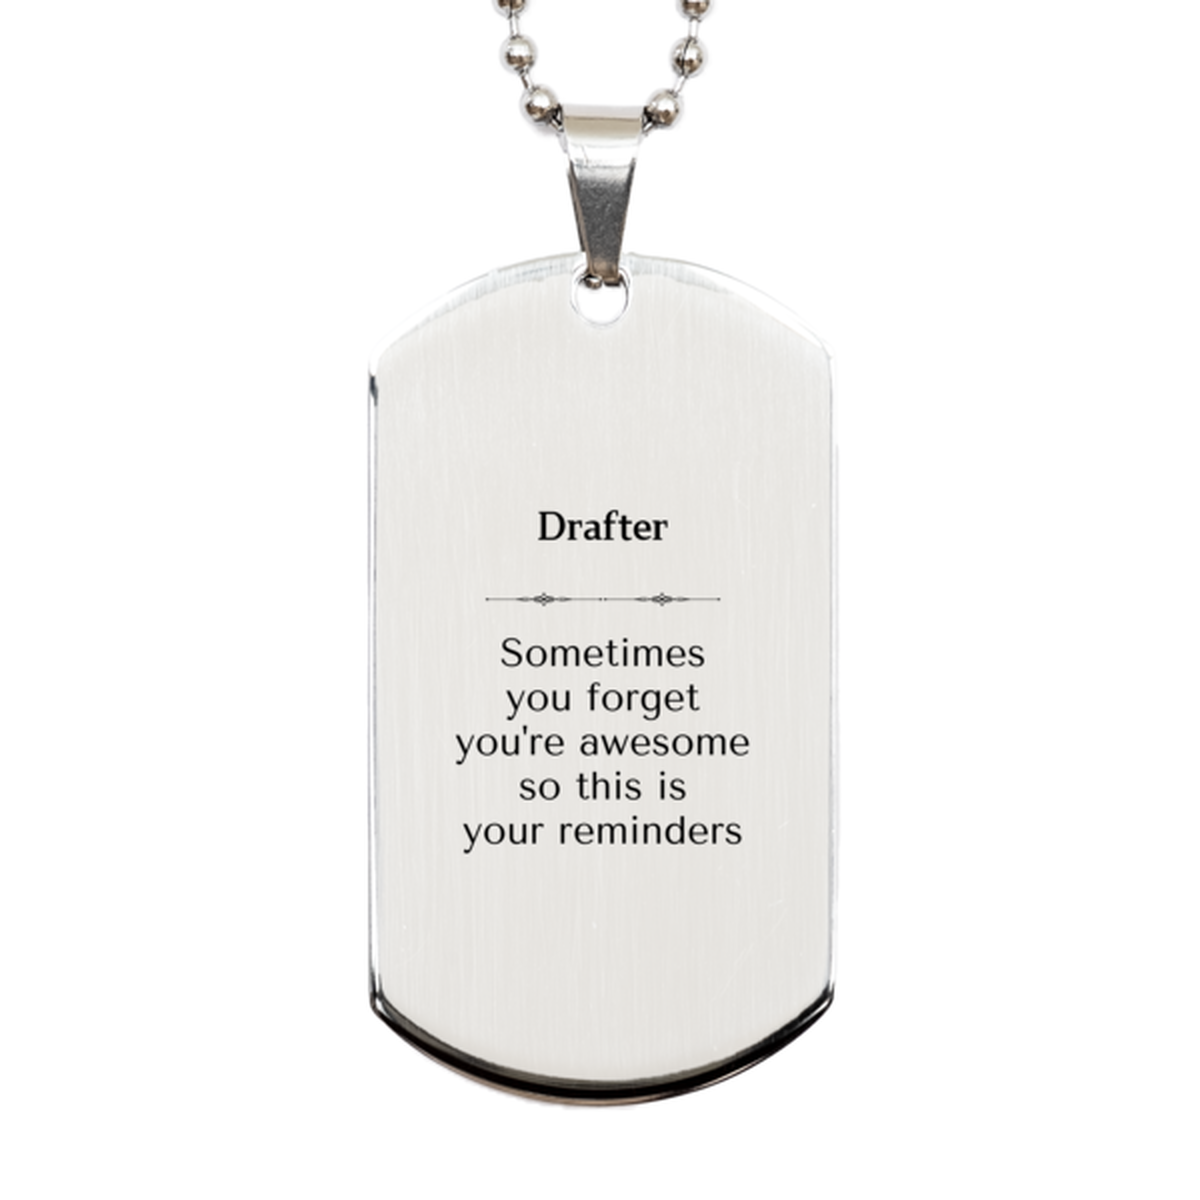 Sentimental Drafter Silver Dog Tag, Drafter Sometimes you forget you're awesome so this is your reminders, Graduation Christmas Birthday Gifts for Drafter, Men, Women, Coworkers